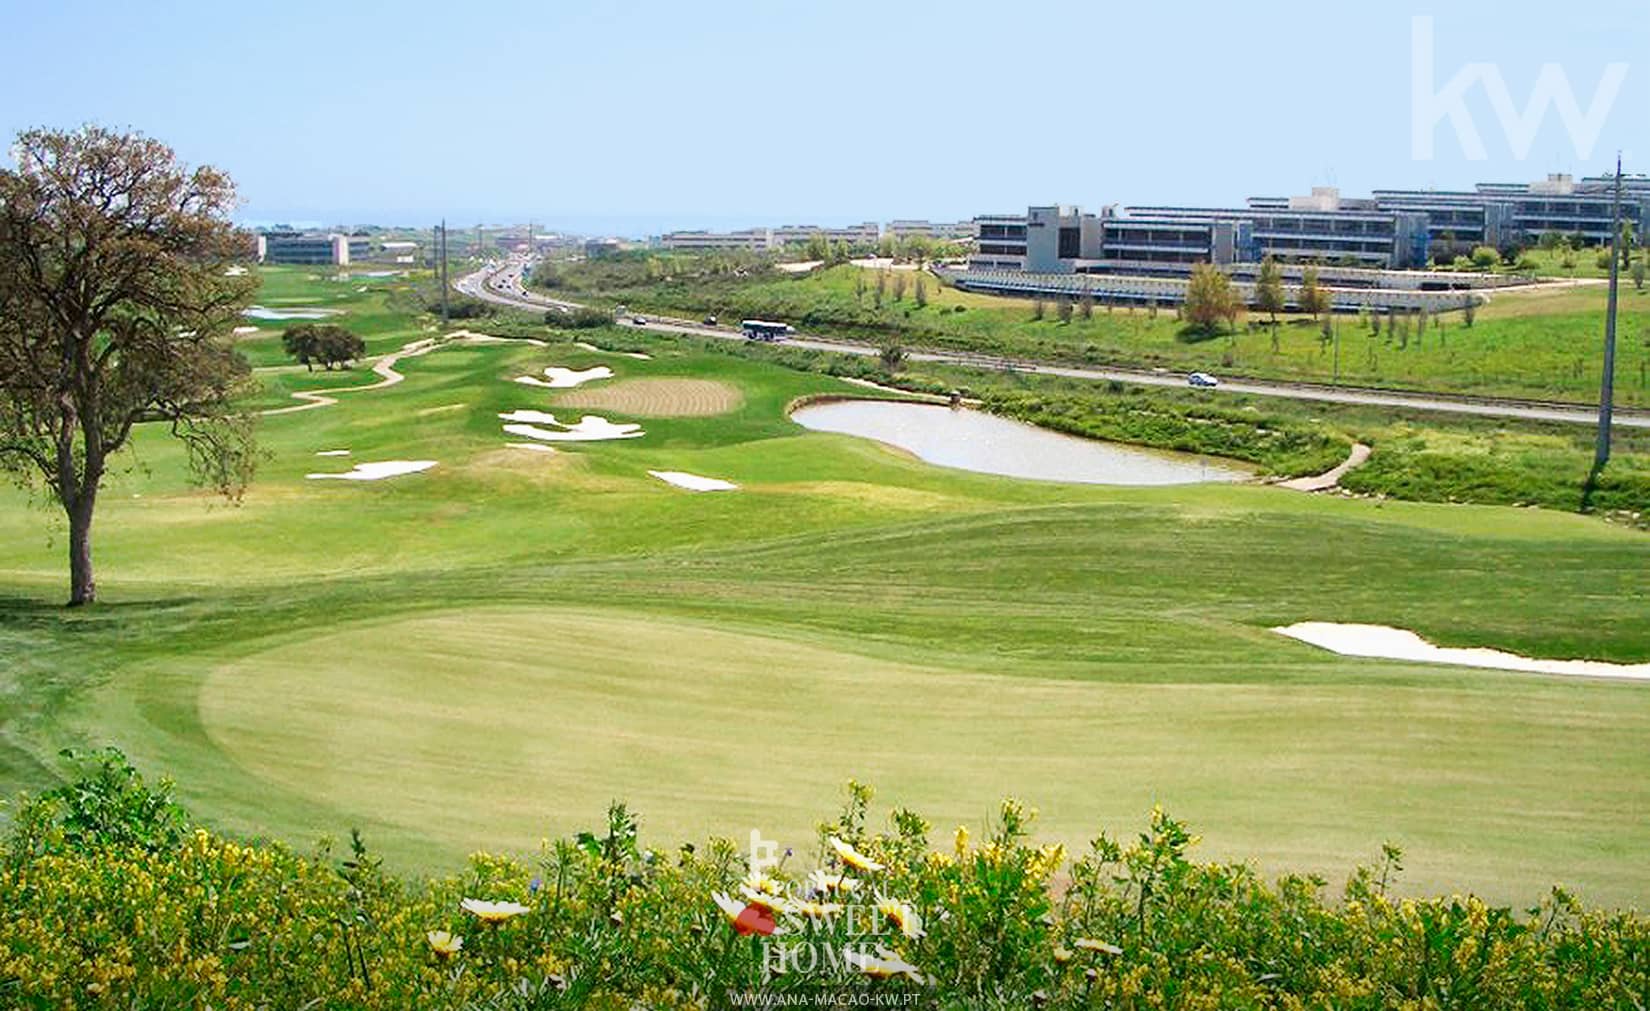 View of the Golf Resort